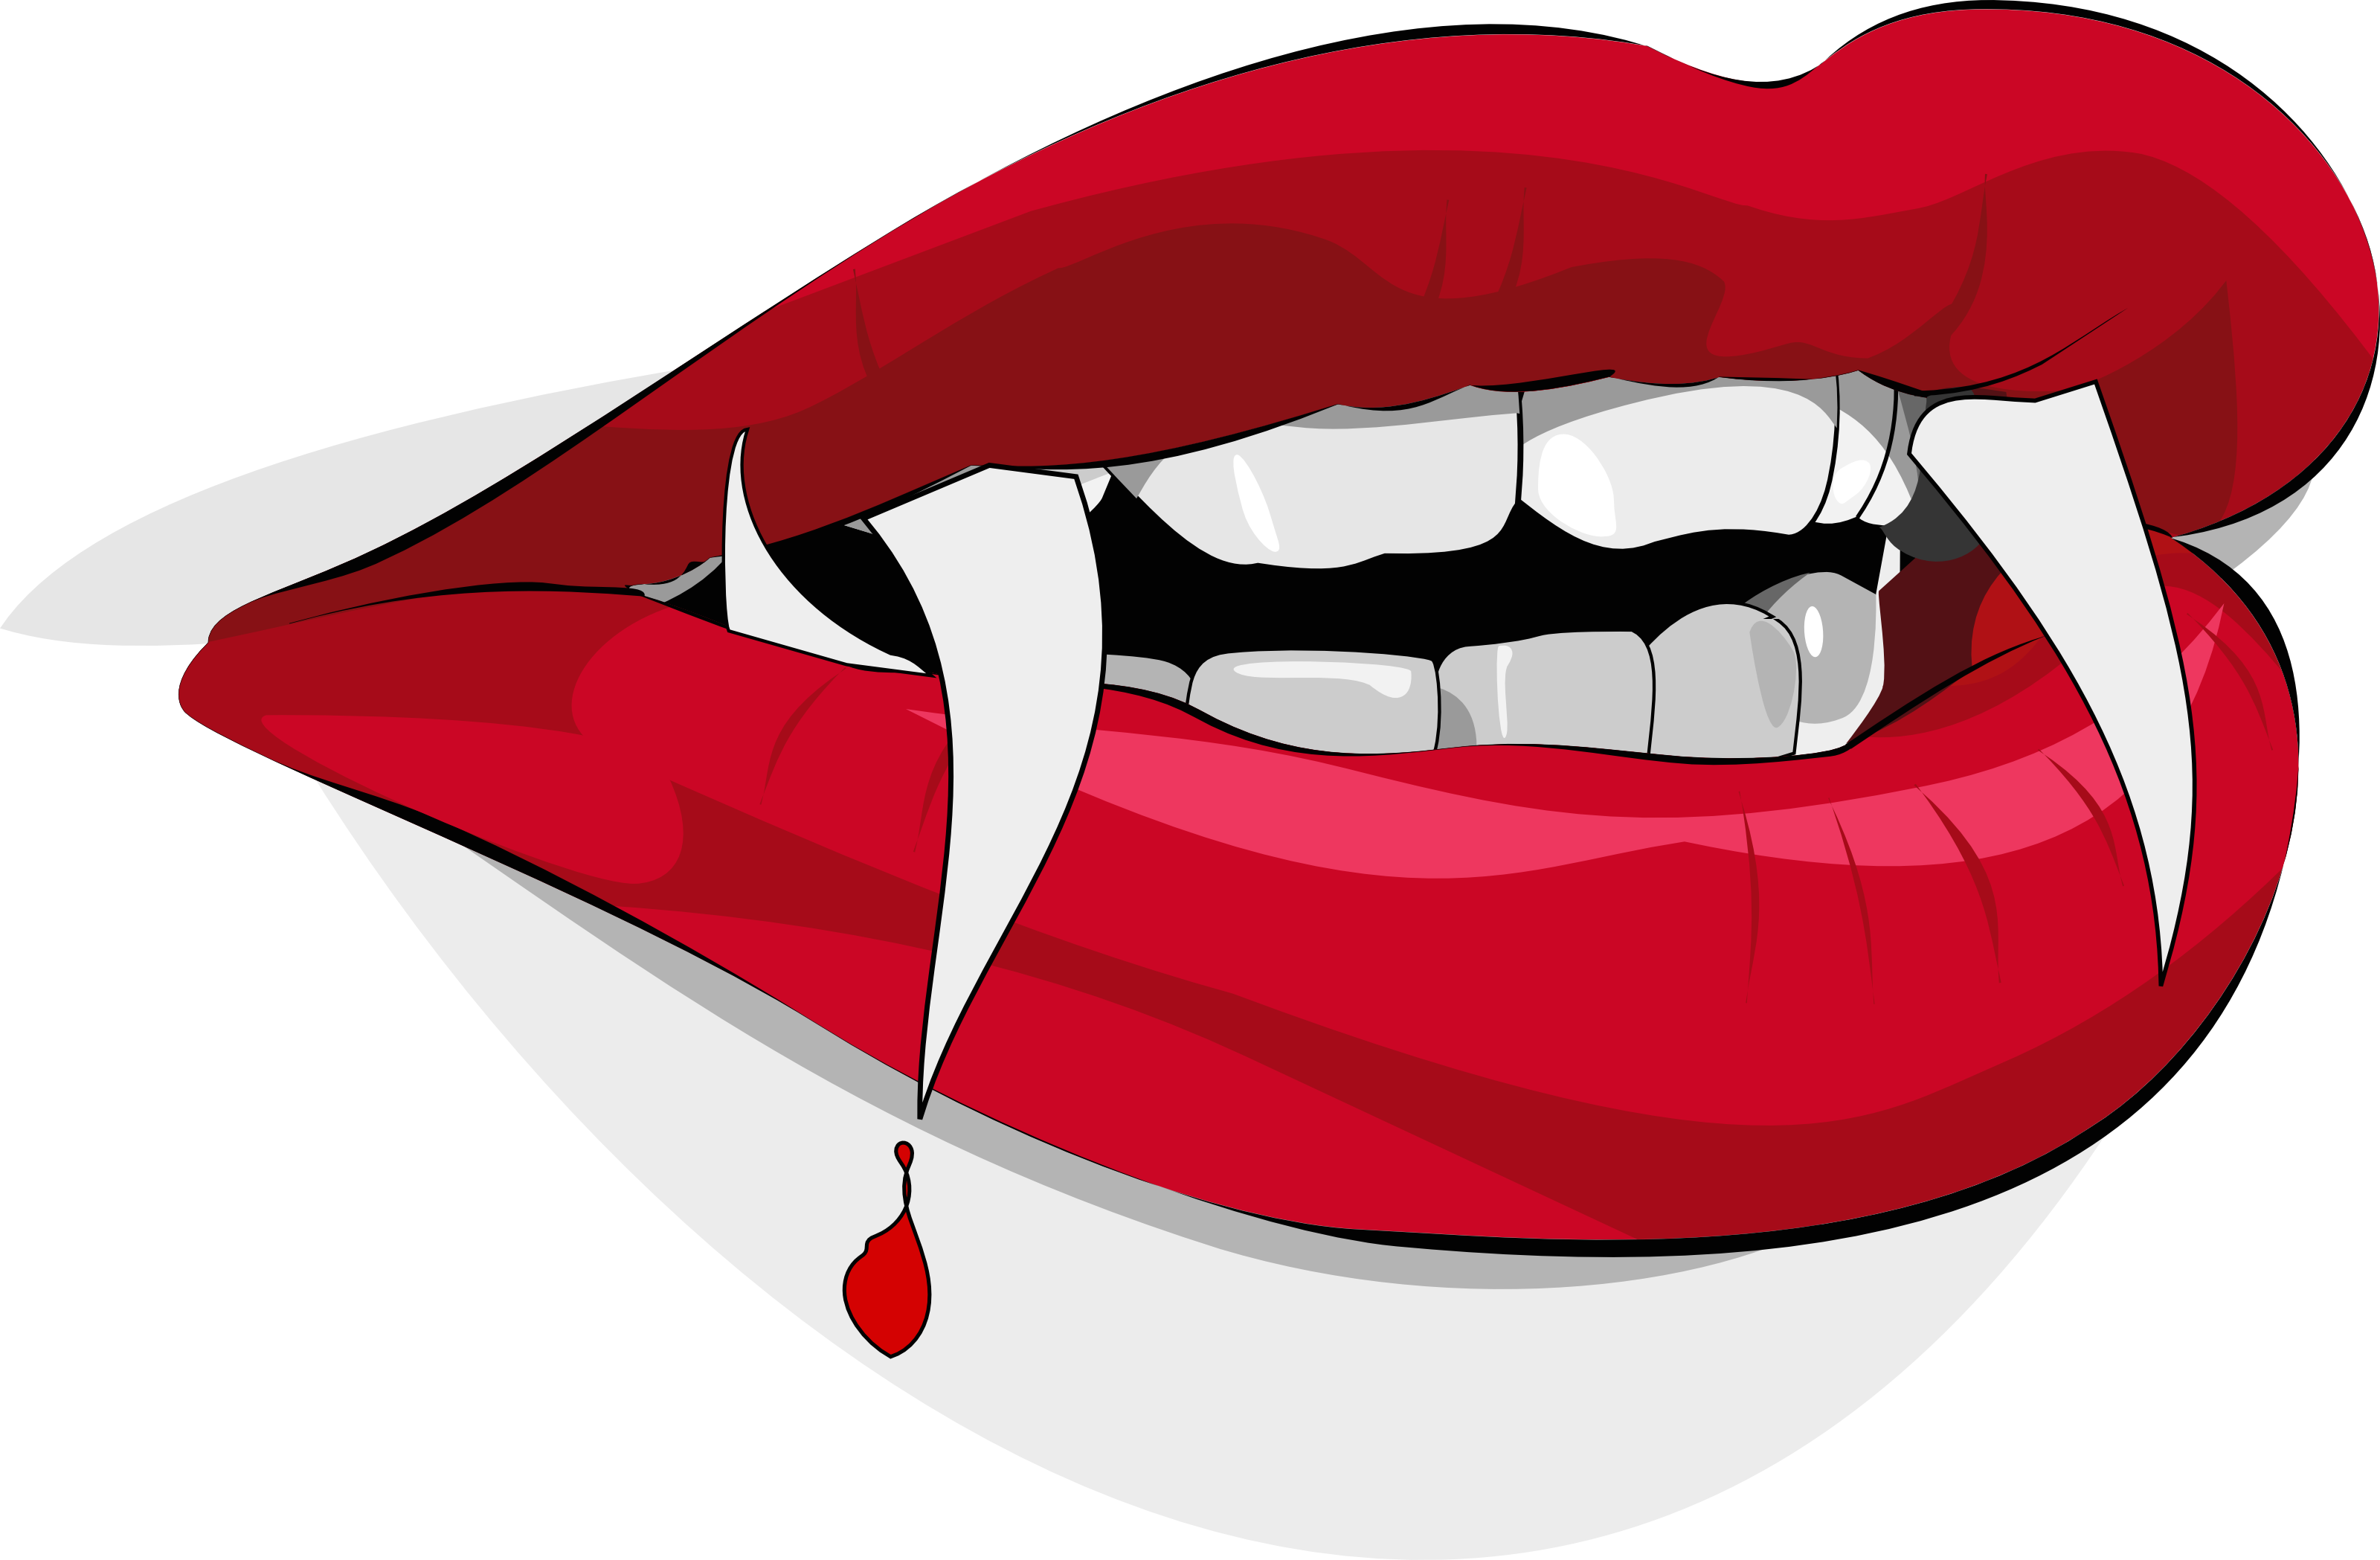 free clipart of lips - photo #46